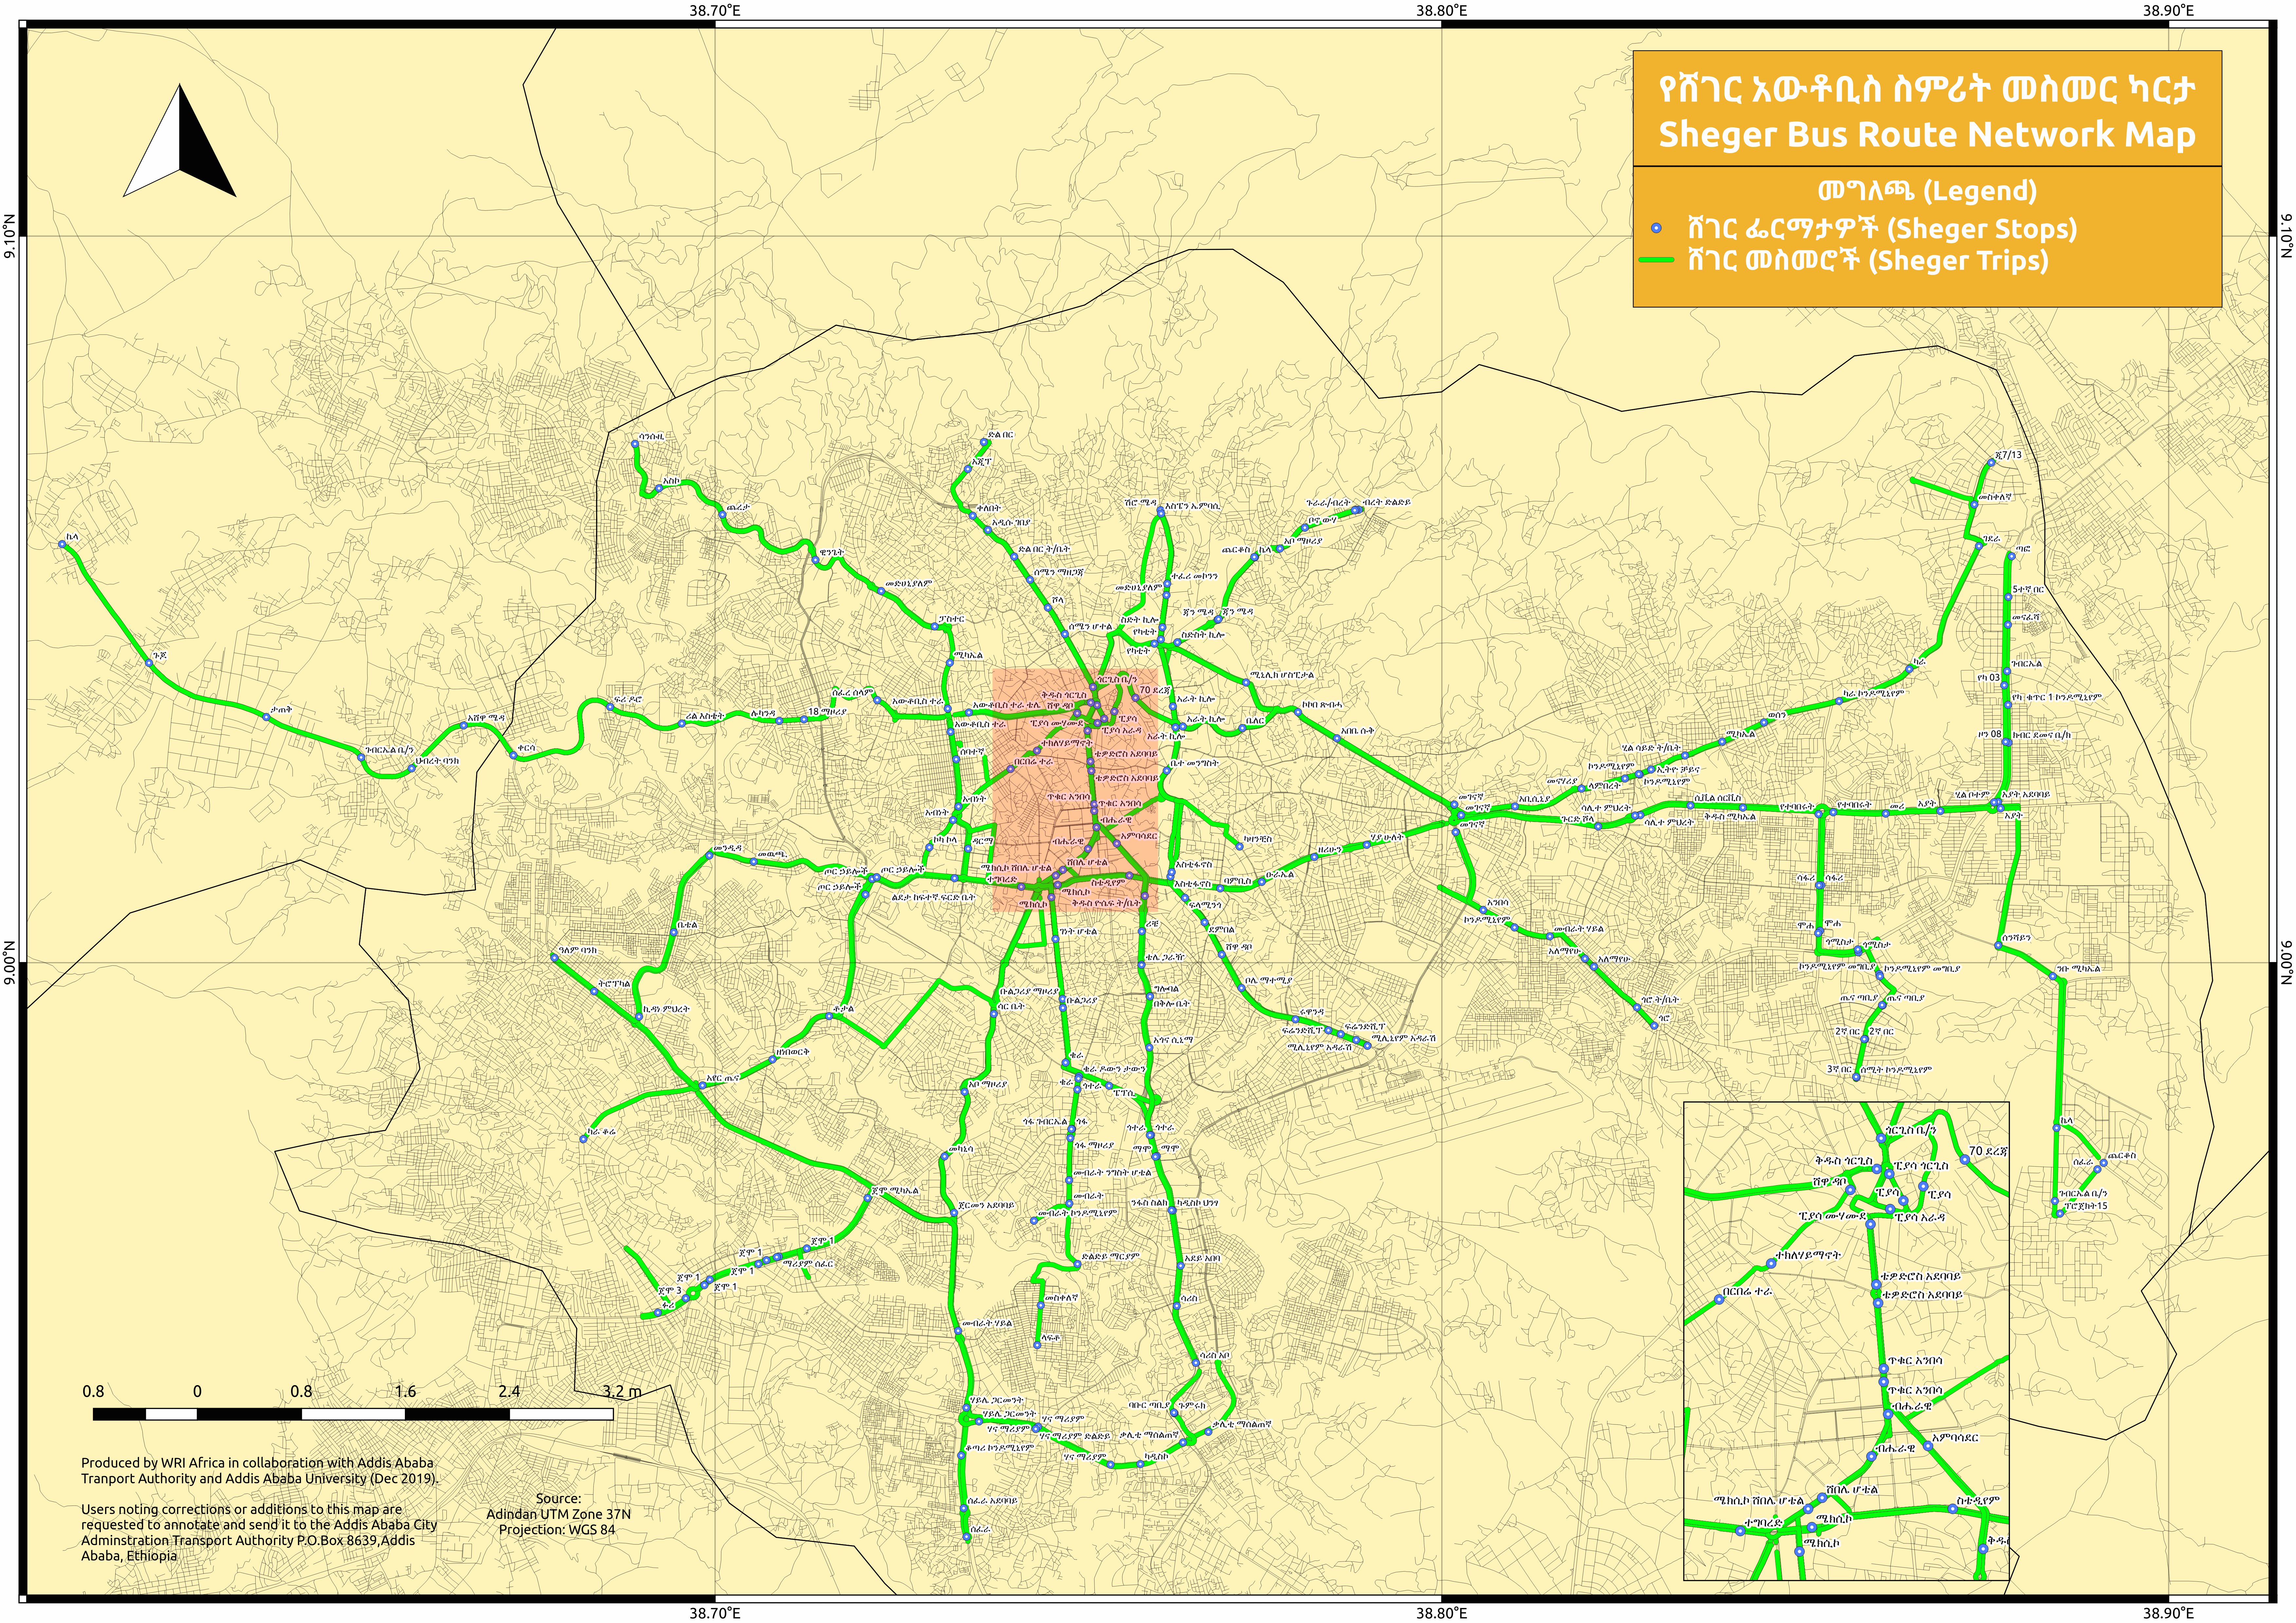 Sheger City Bus Network - The Digital Mapping of Addis Ababa's Public Transport Network